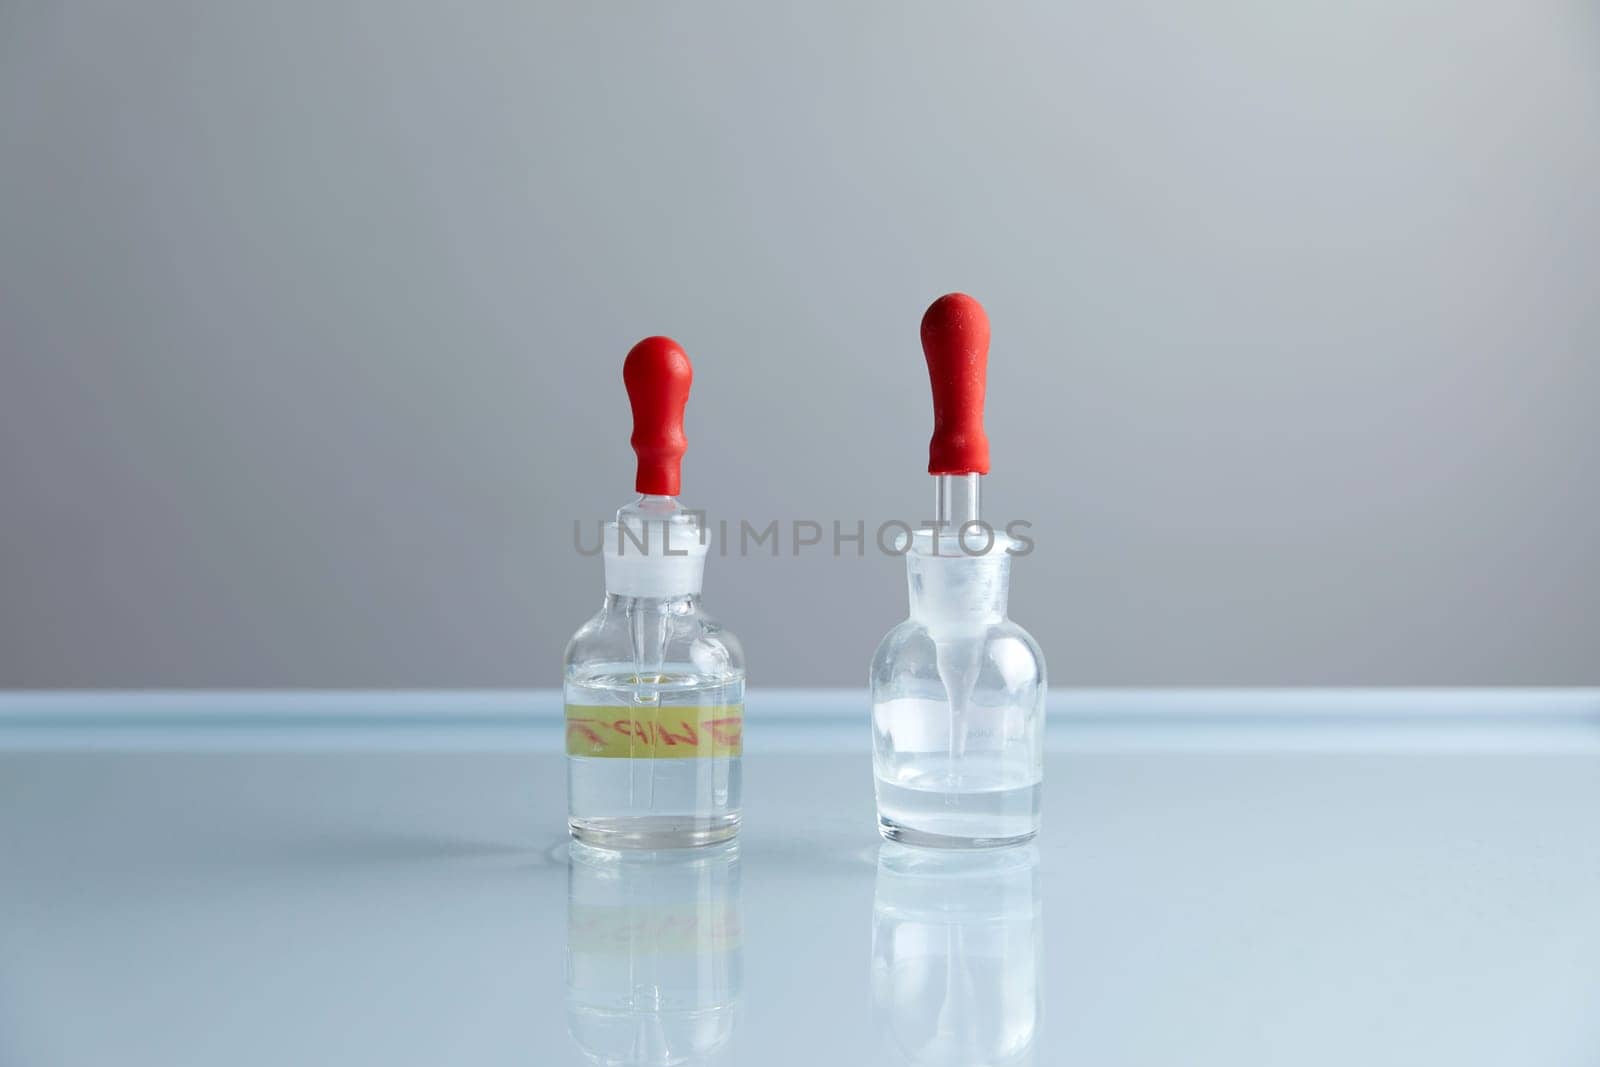 Pipettes for taking samples for test in special chemical laboratory or clinic by Mariakray